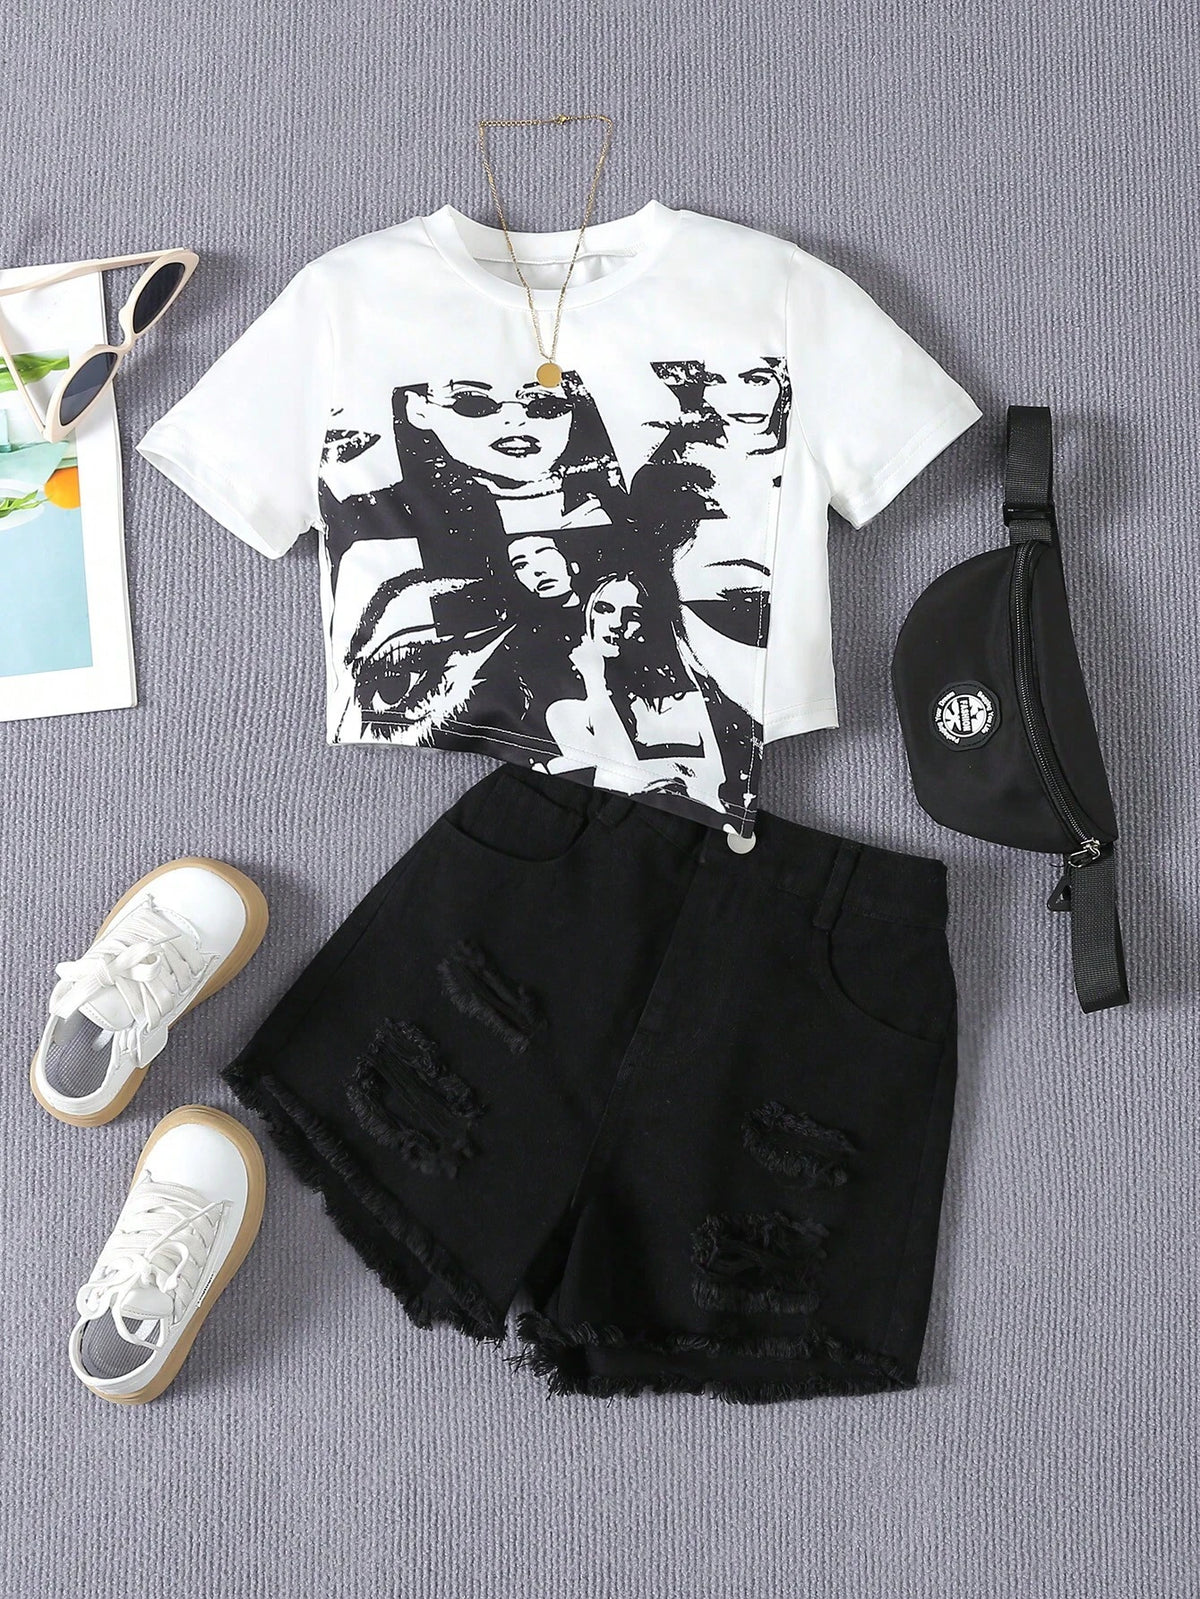 Tween Girls' Comfortable Casual Portrait Print Top And Black Ripped Shorts 2pcs Set